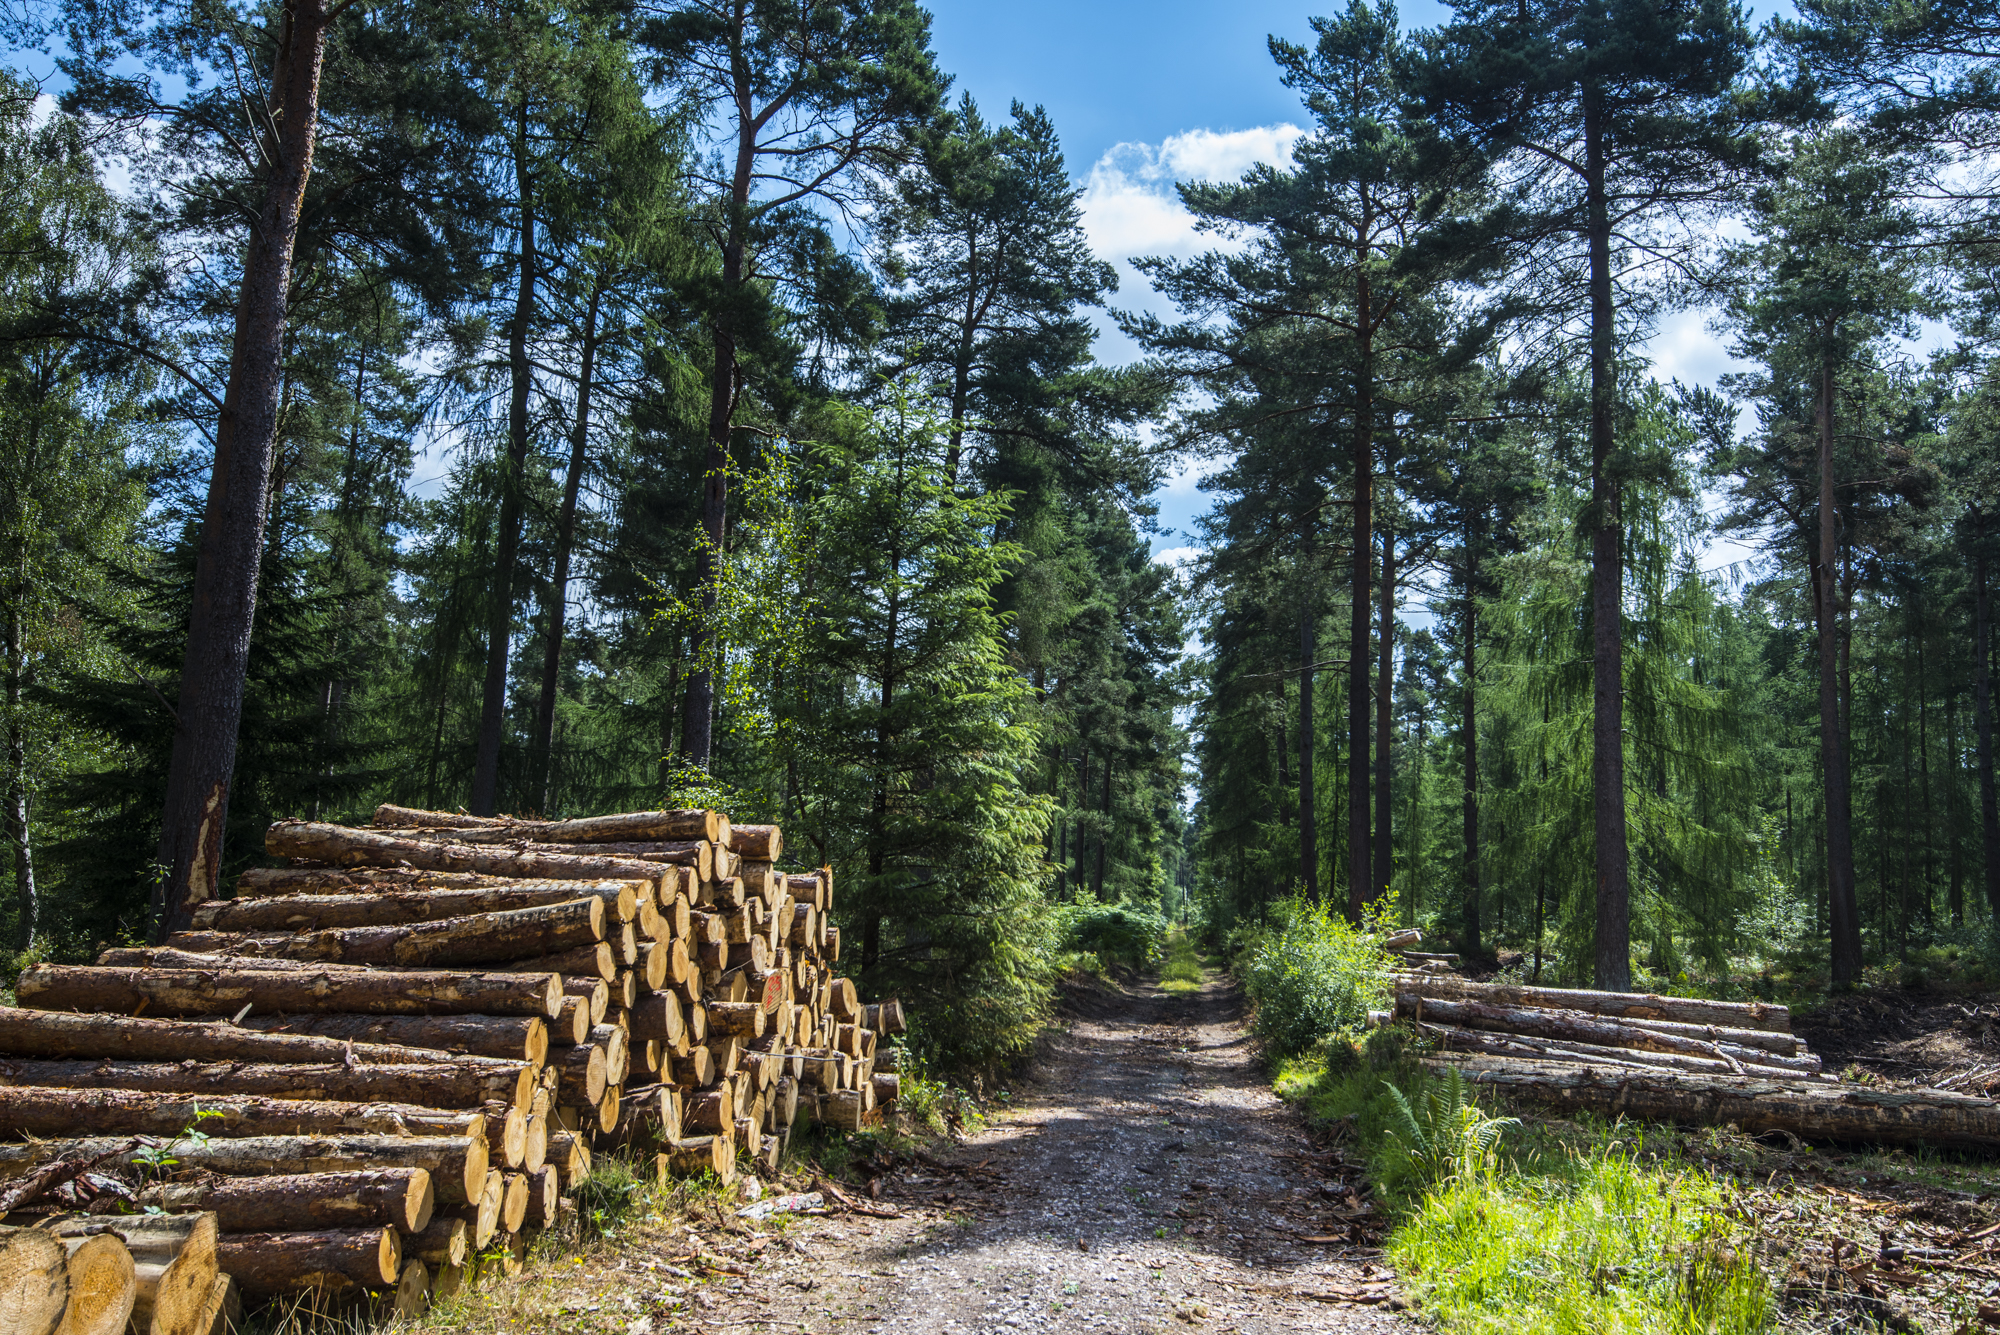 The strategy could help boost sustainable forestry (Forestry Commission/PA)